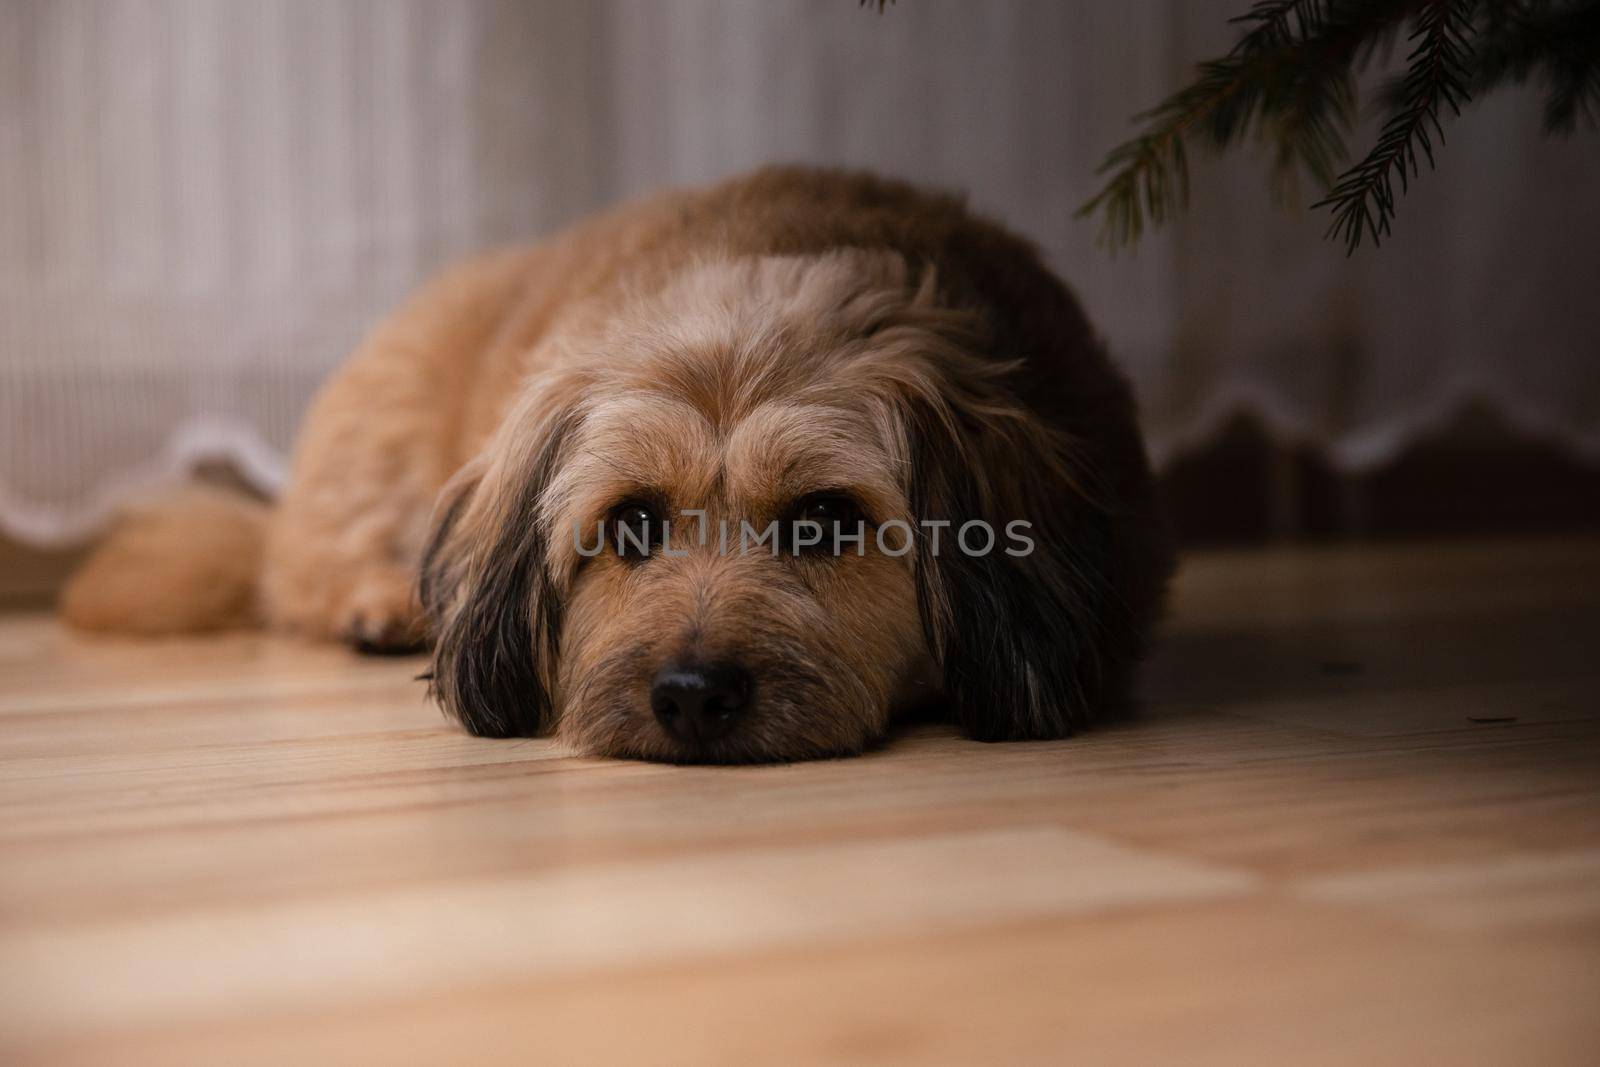 A mongrel dog is resting on the floor under a coniferous spruce branch. The dog's muzzle lies on the living room floor.